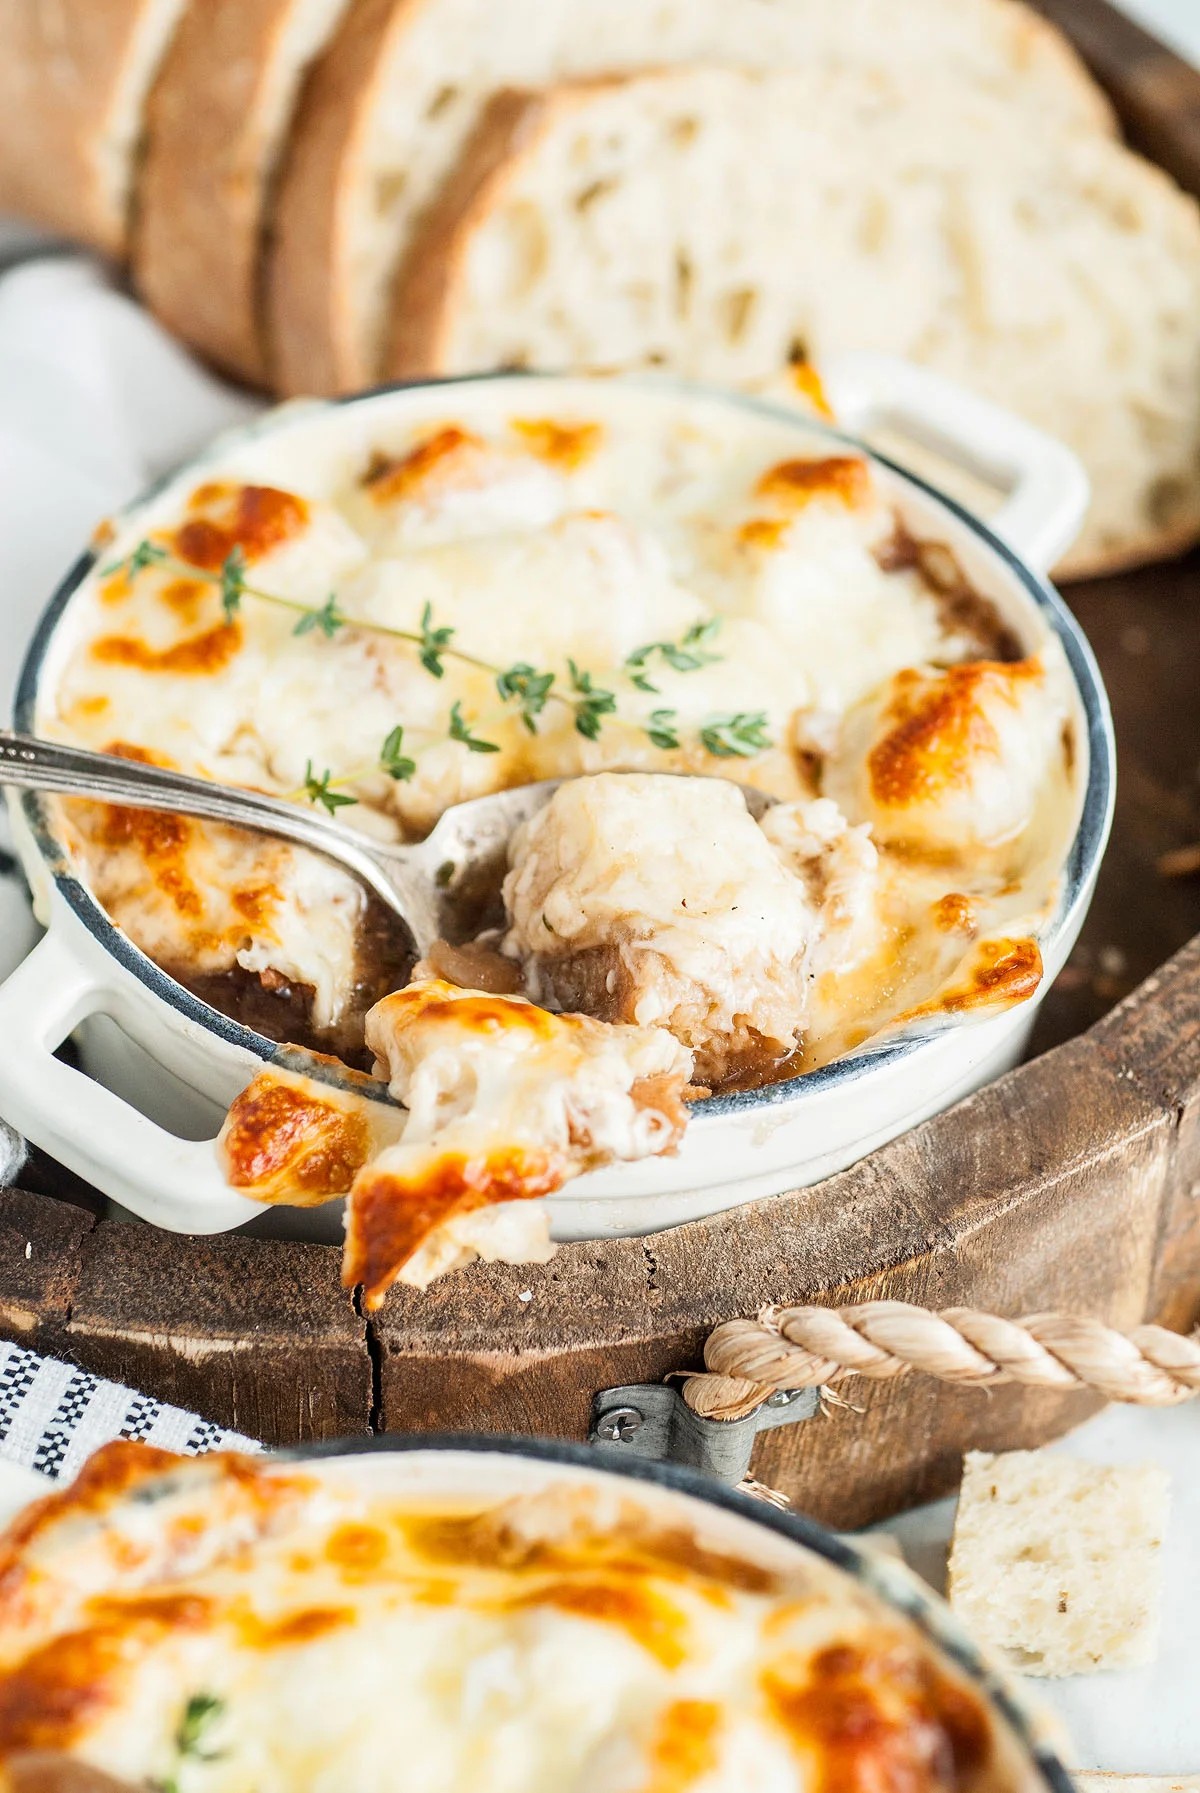 How to Make the Best Italian Inspired French Onion Soup